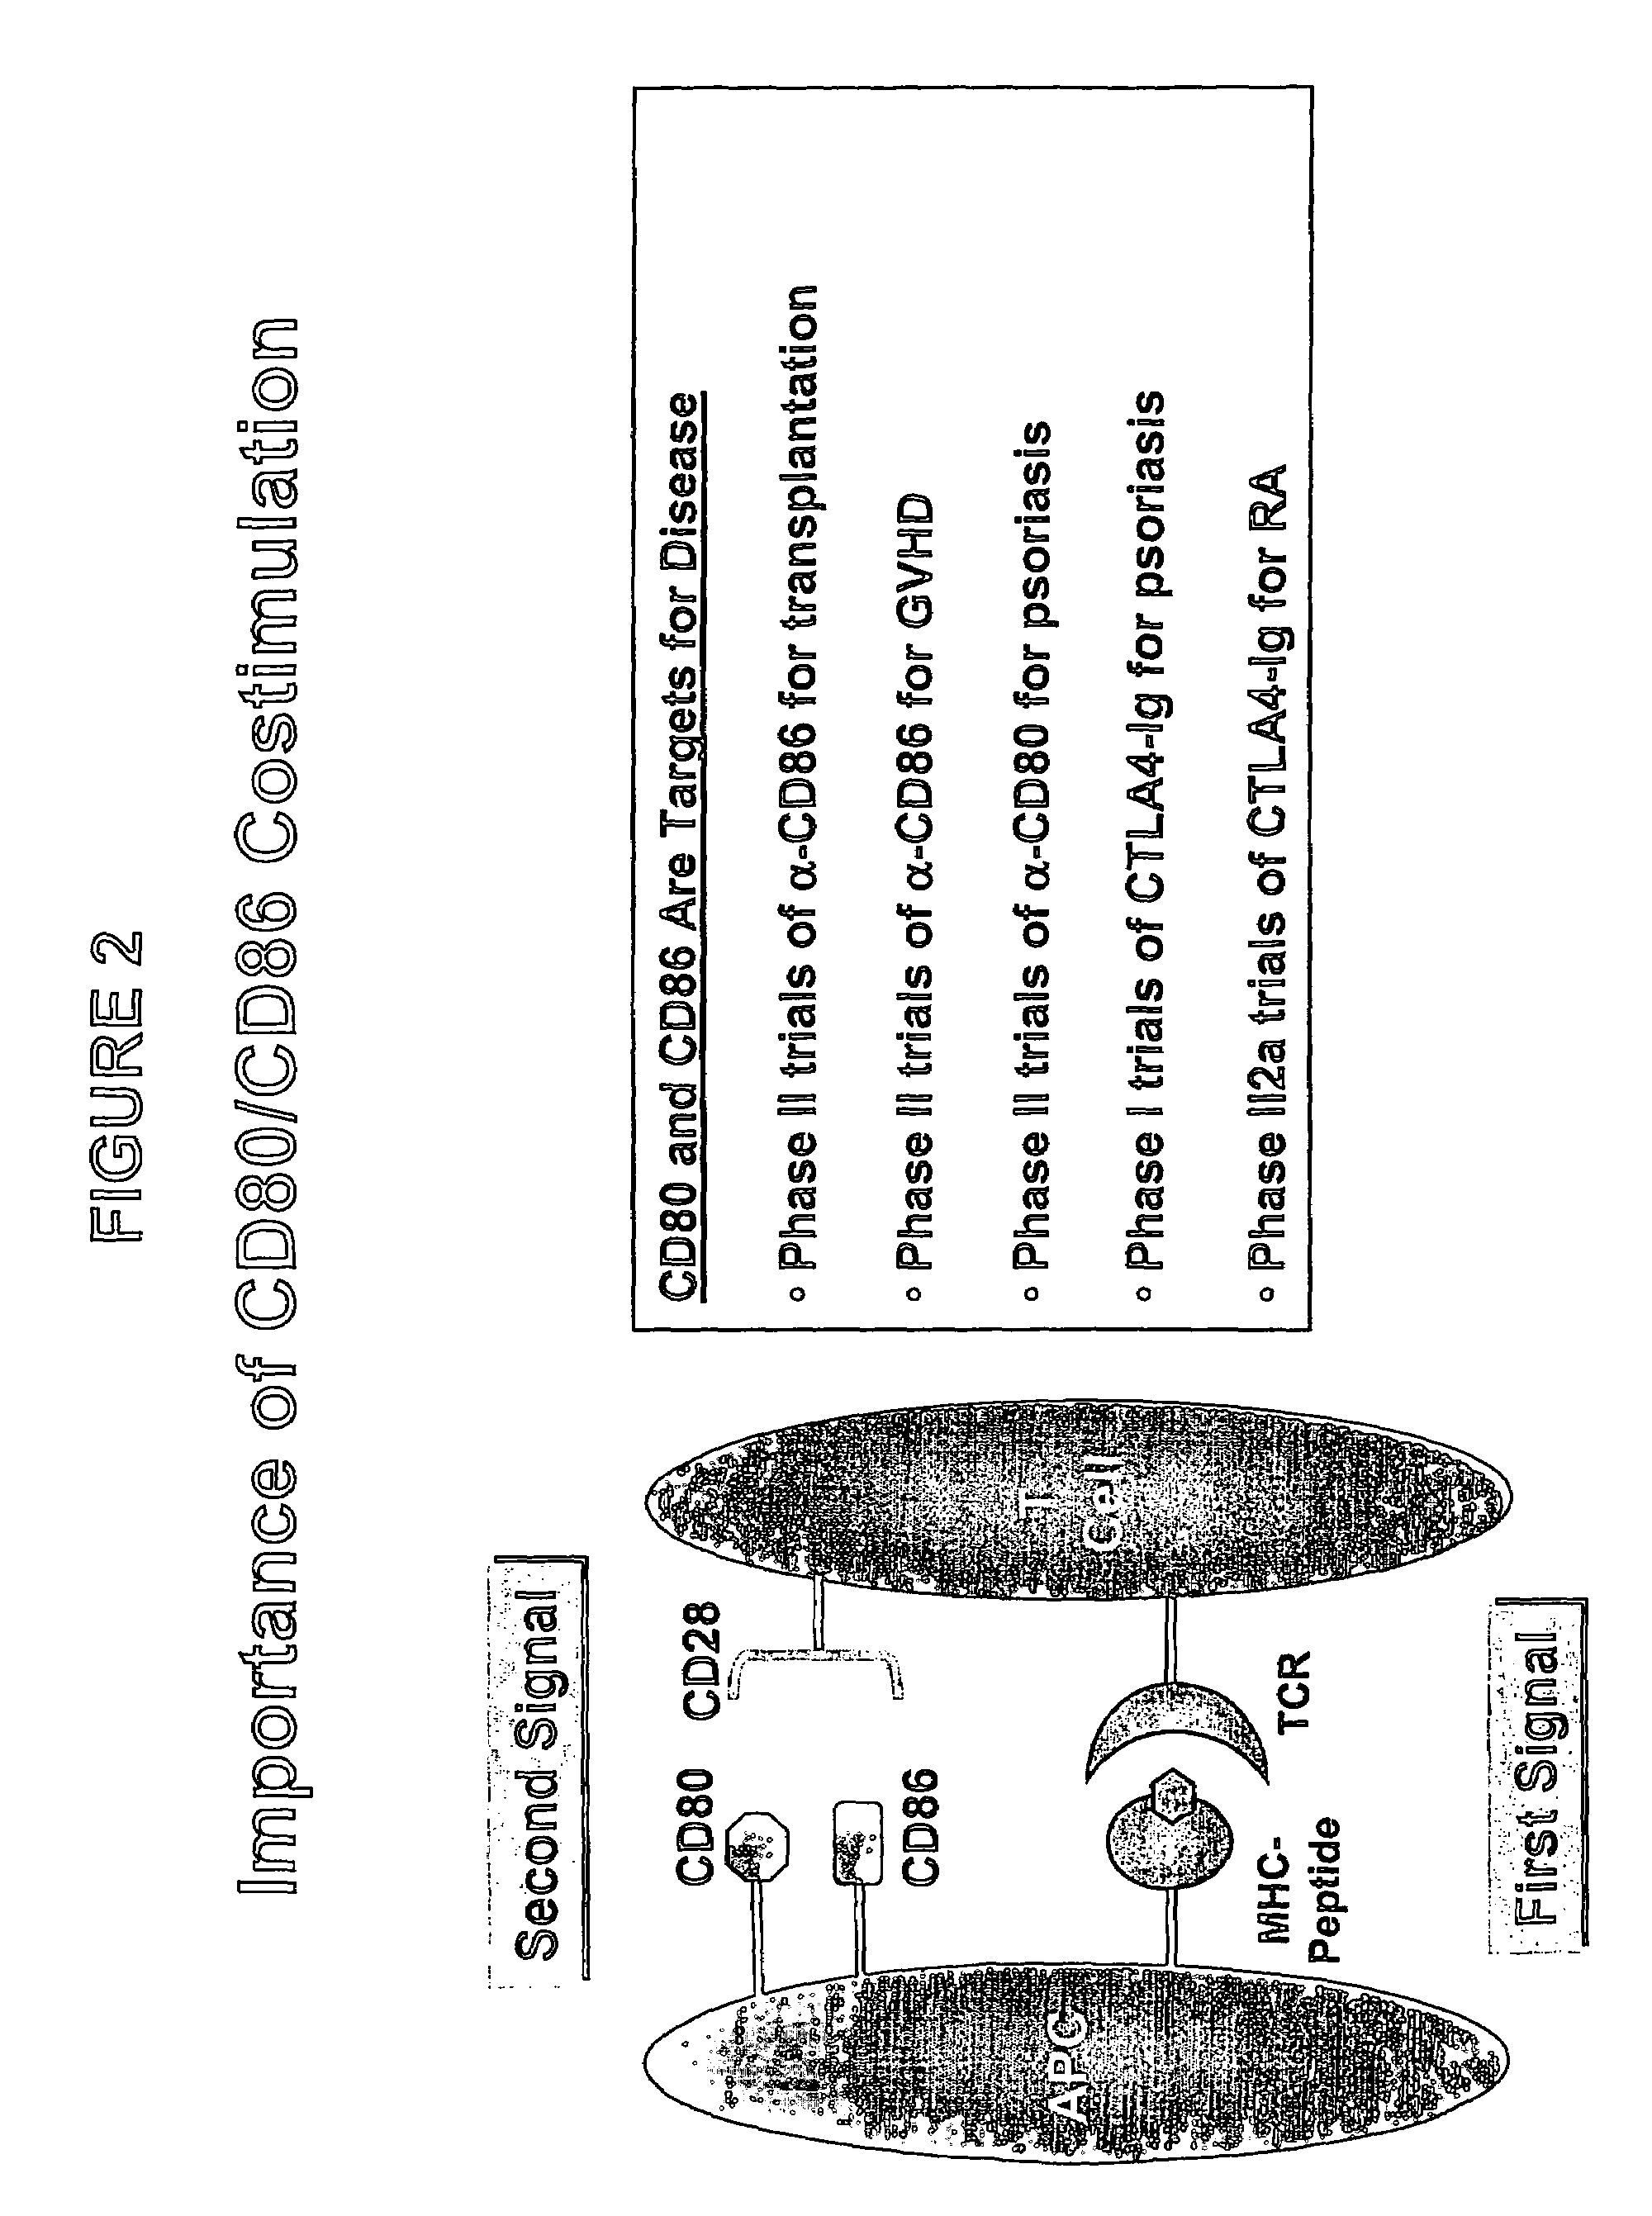 Modulators of lymphocyte activation, Mkk3b compositions and methods of use